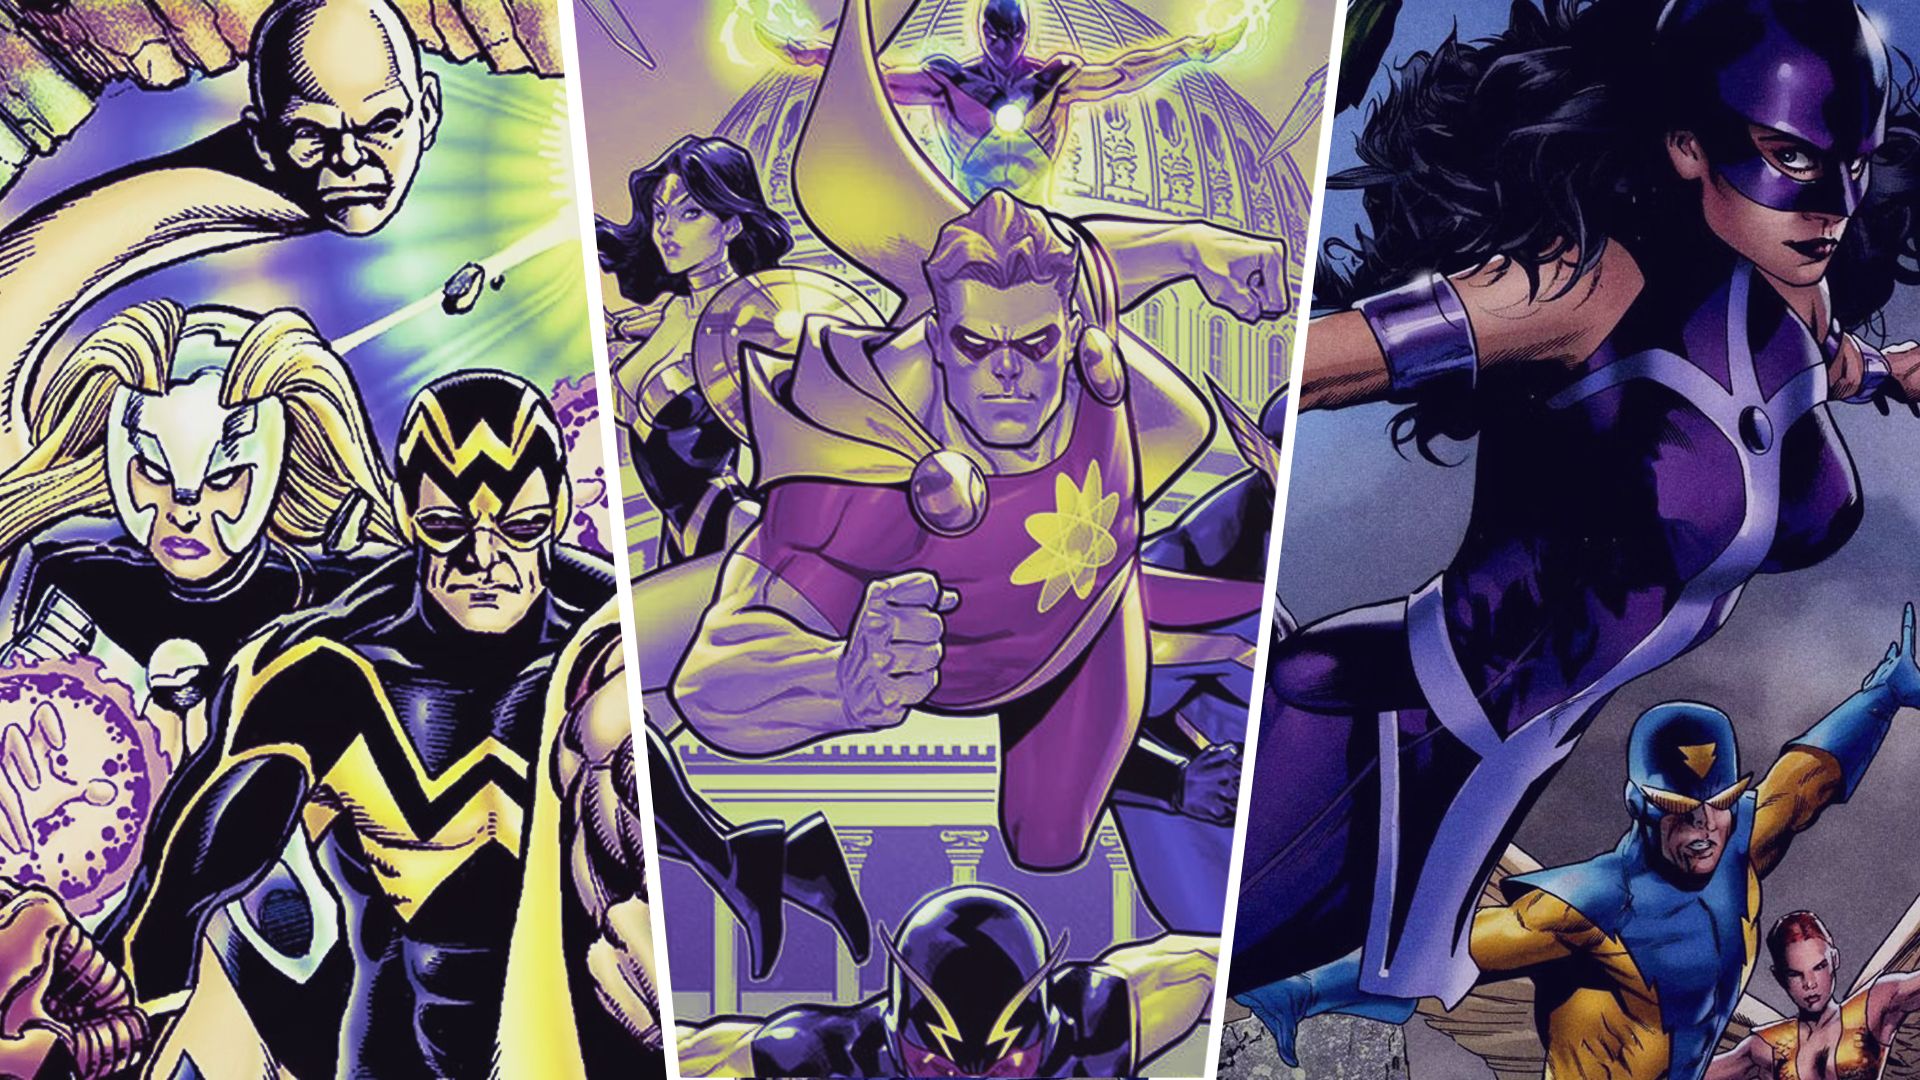 An edited image of different Squadron Supreme characters from the comics flying and fighting